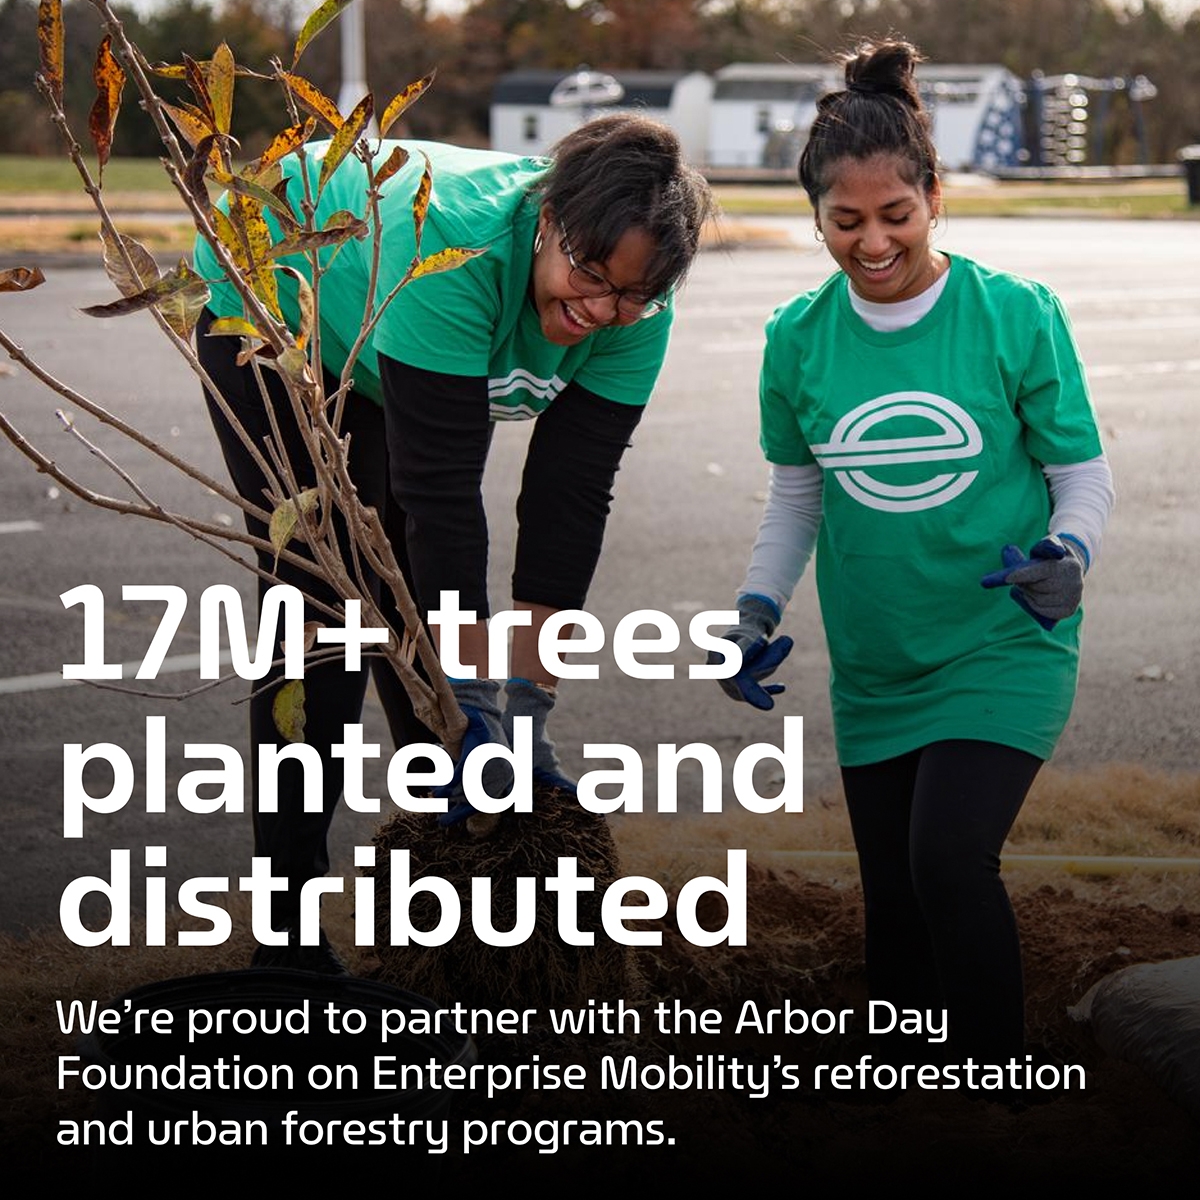 Happy #ArborDay! Did you know that Enterprise Mobility has partnered with the Arbor Day Foundation for over a decade to help restore over 36,000 acres of forests?

Learn more at EM.com/Trees

#EnterpriseMobility #iWork4EM